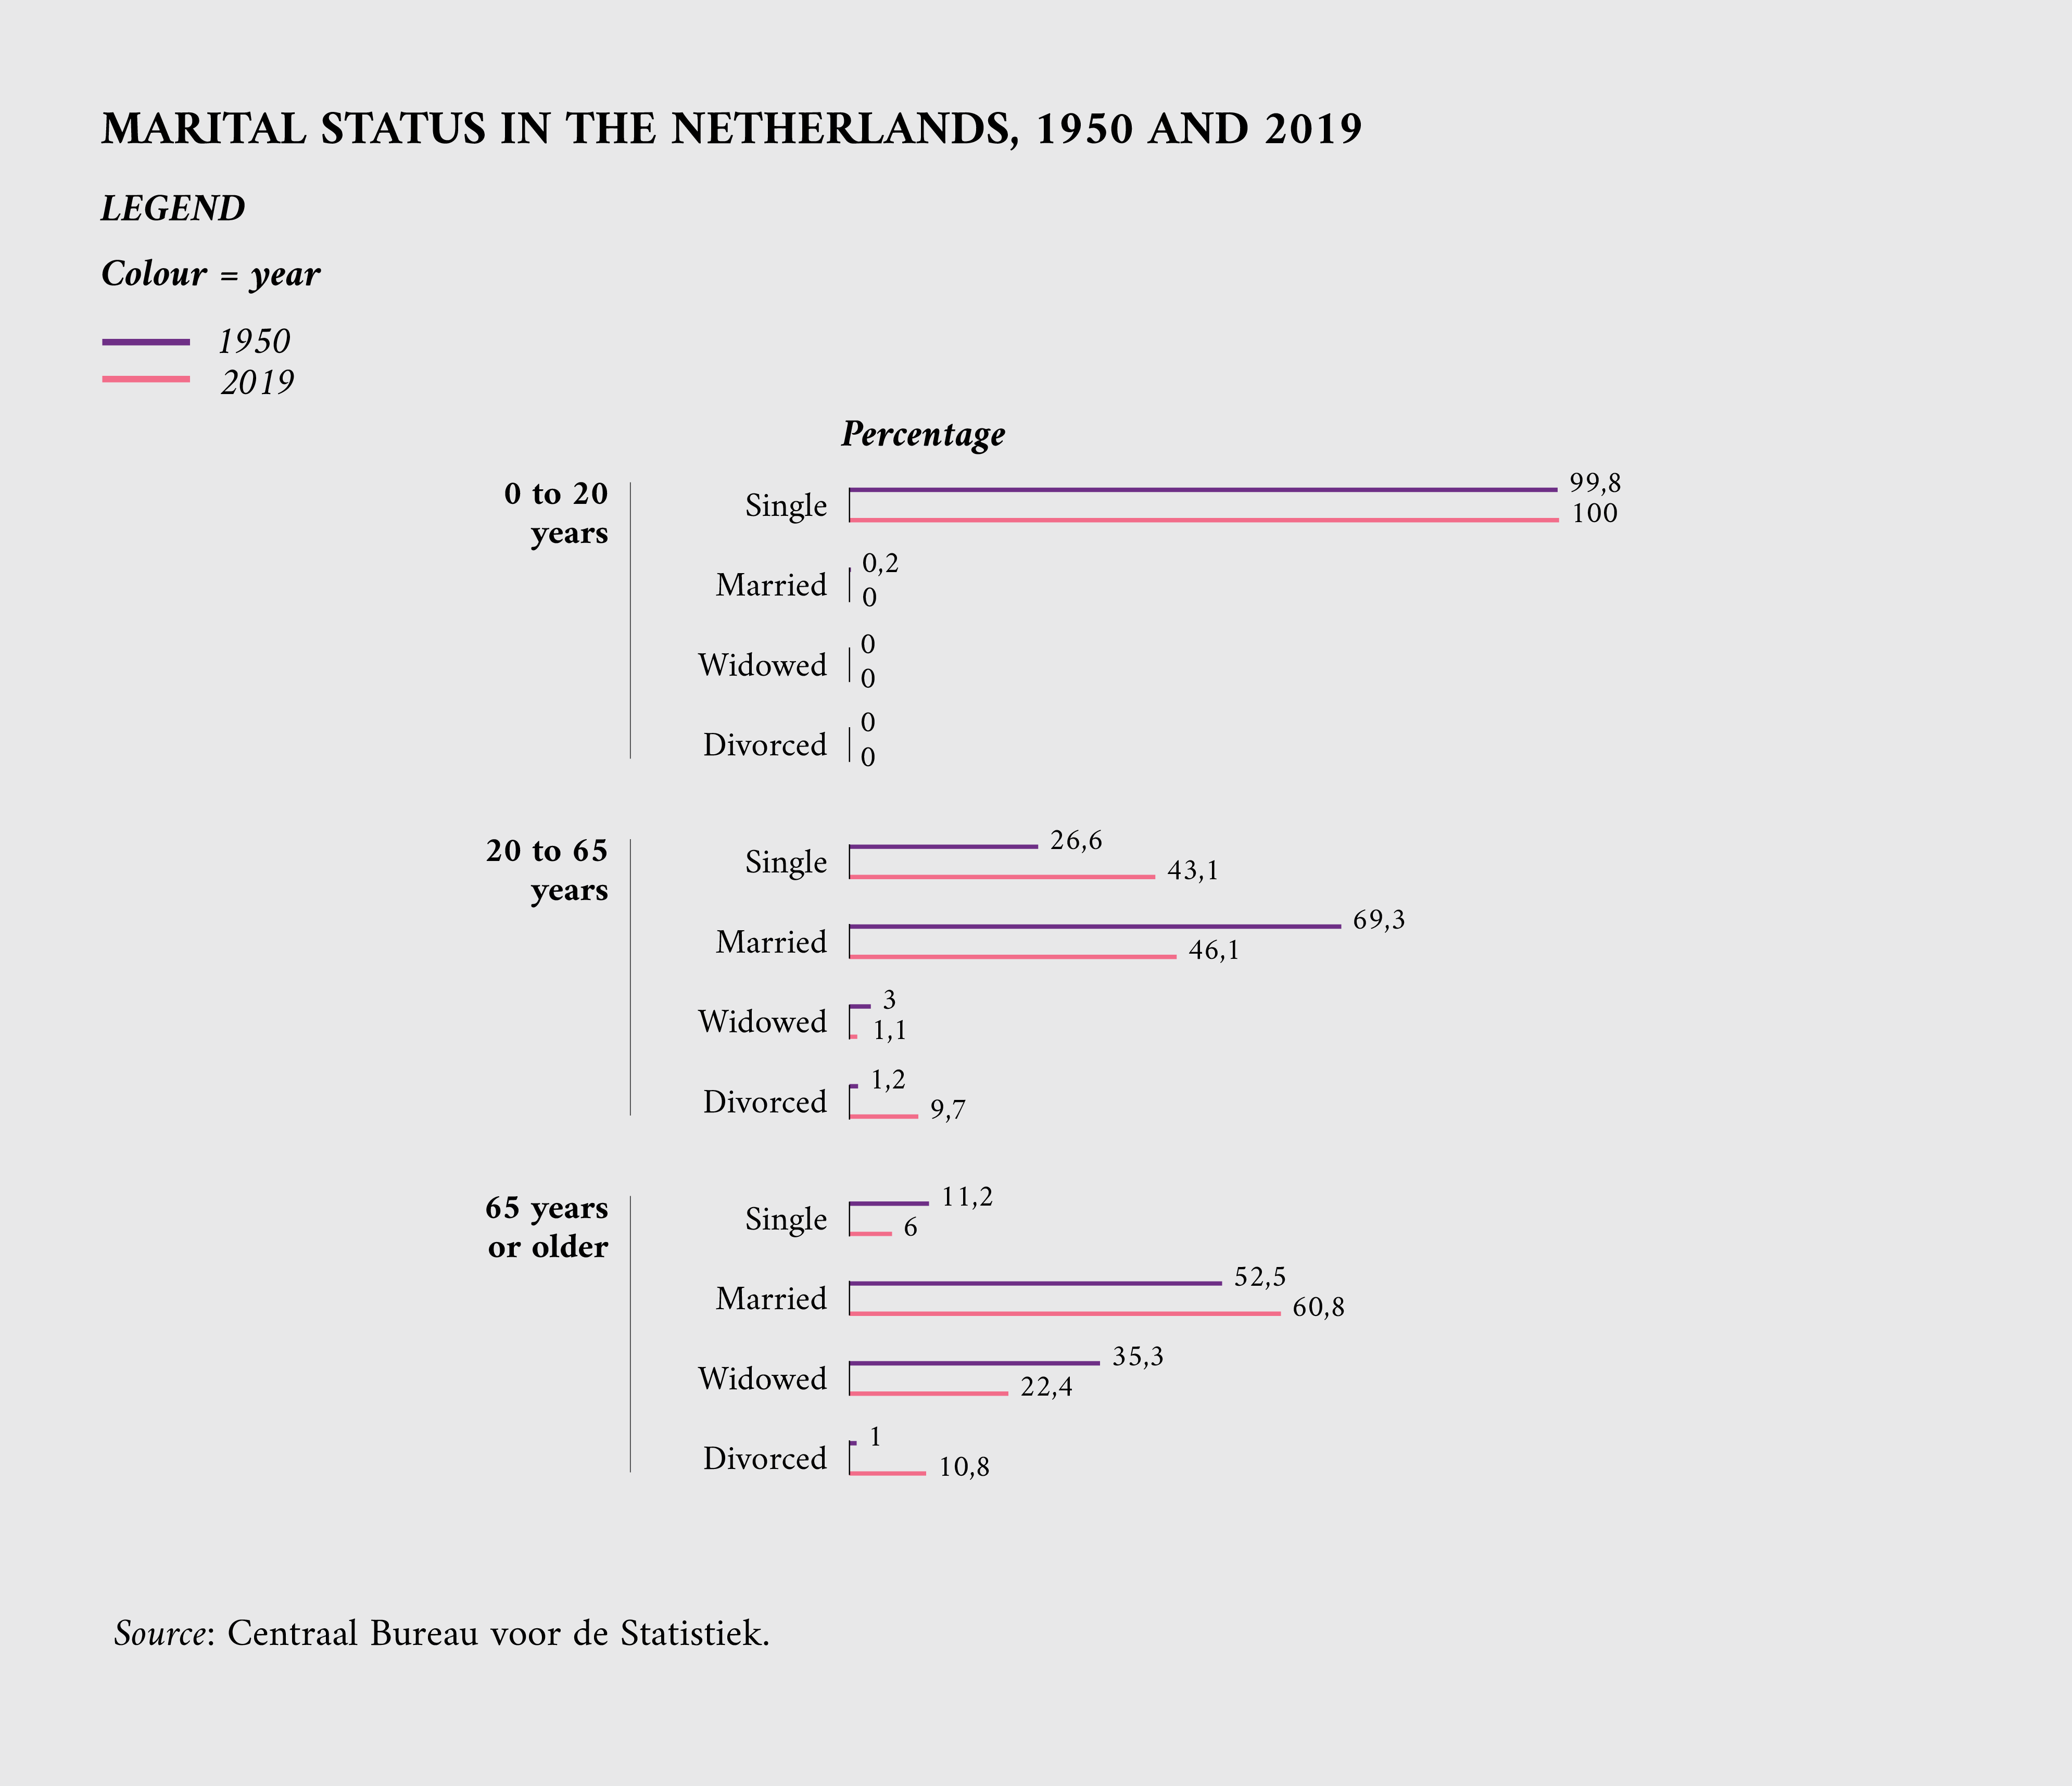 Marital status in the Netherlands, 1950 and 2019